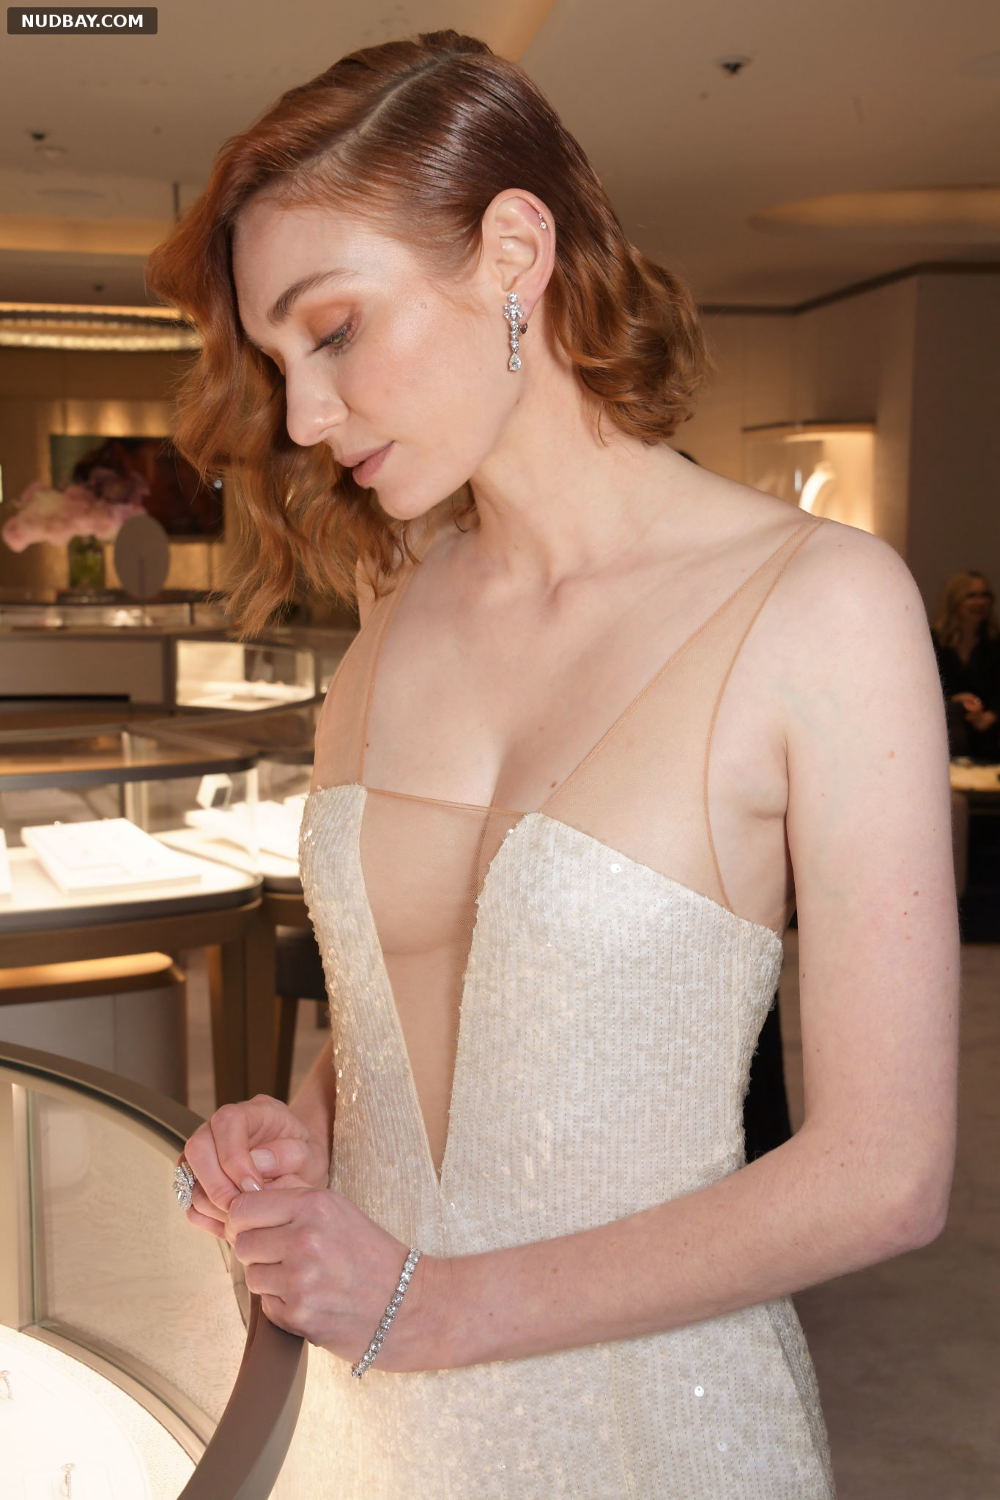 Eleanor Tomlinson Tits at De Beers Jewellers London Flagship Store Opening Event in London Nov 24 2021